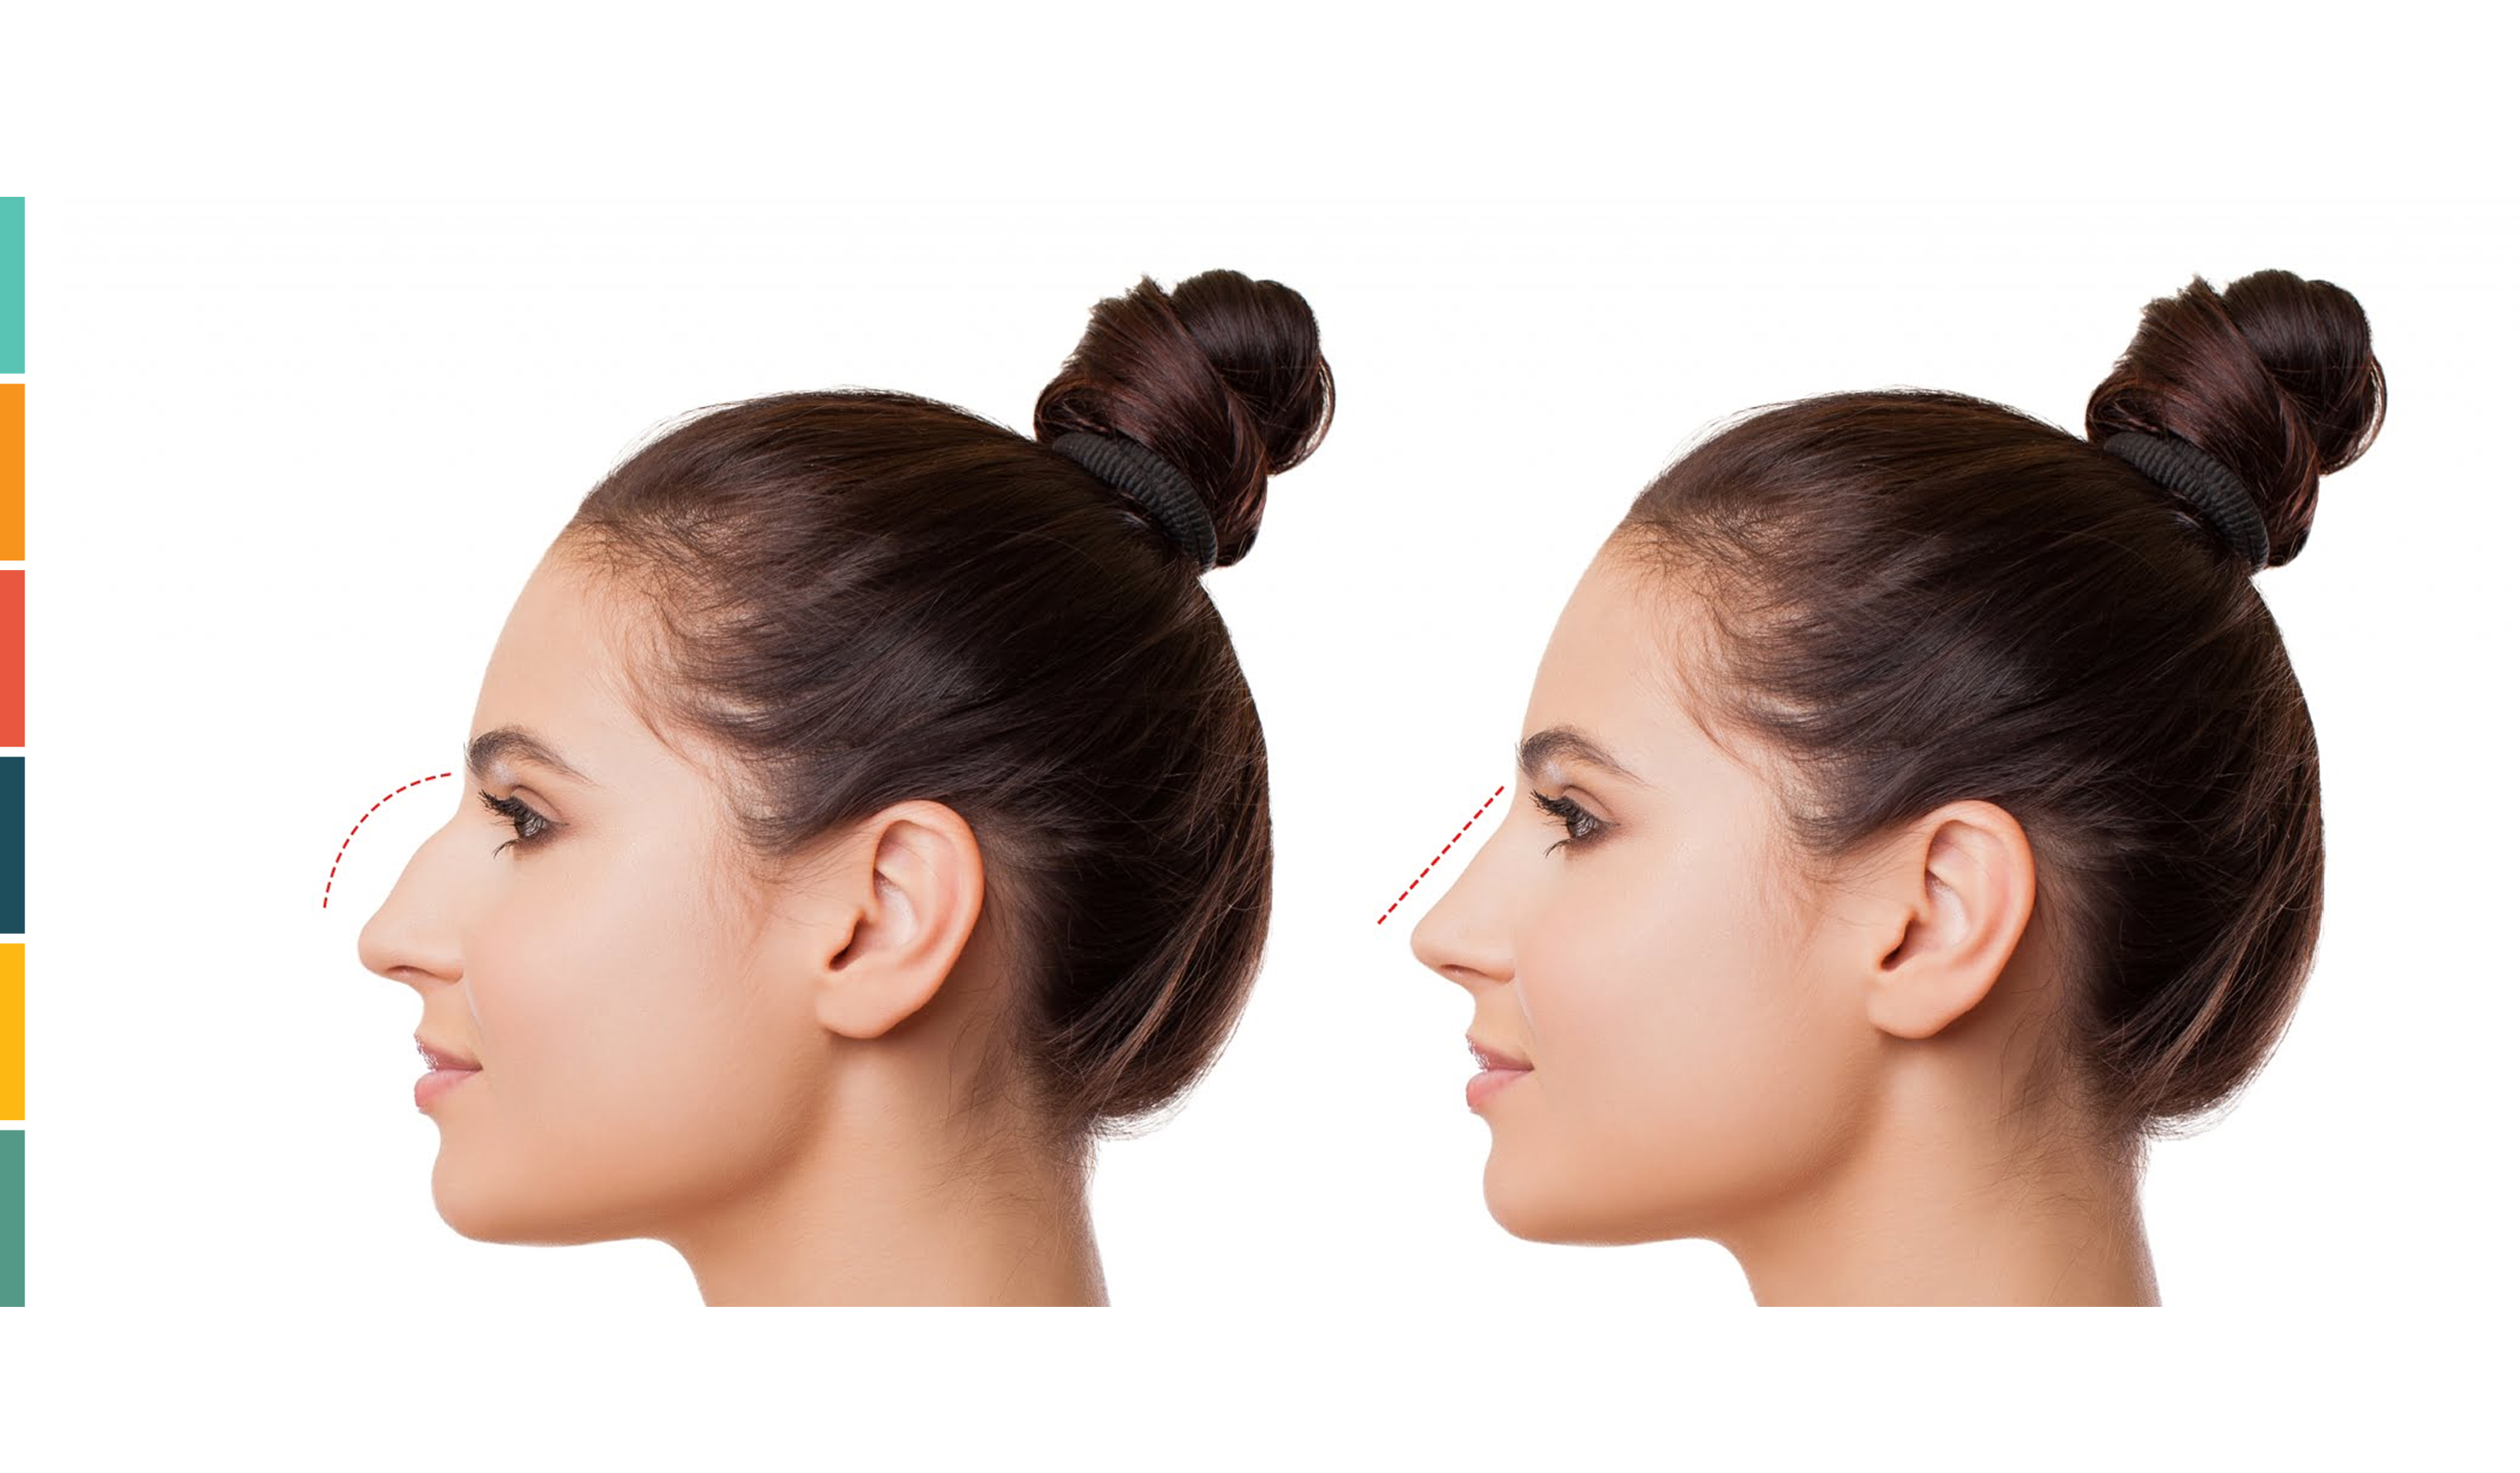 What is Rhinoplasty (nasal aesthetic surgery)?